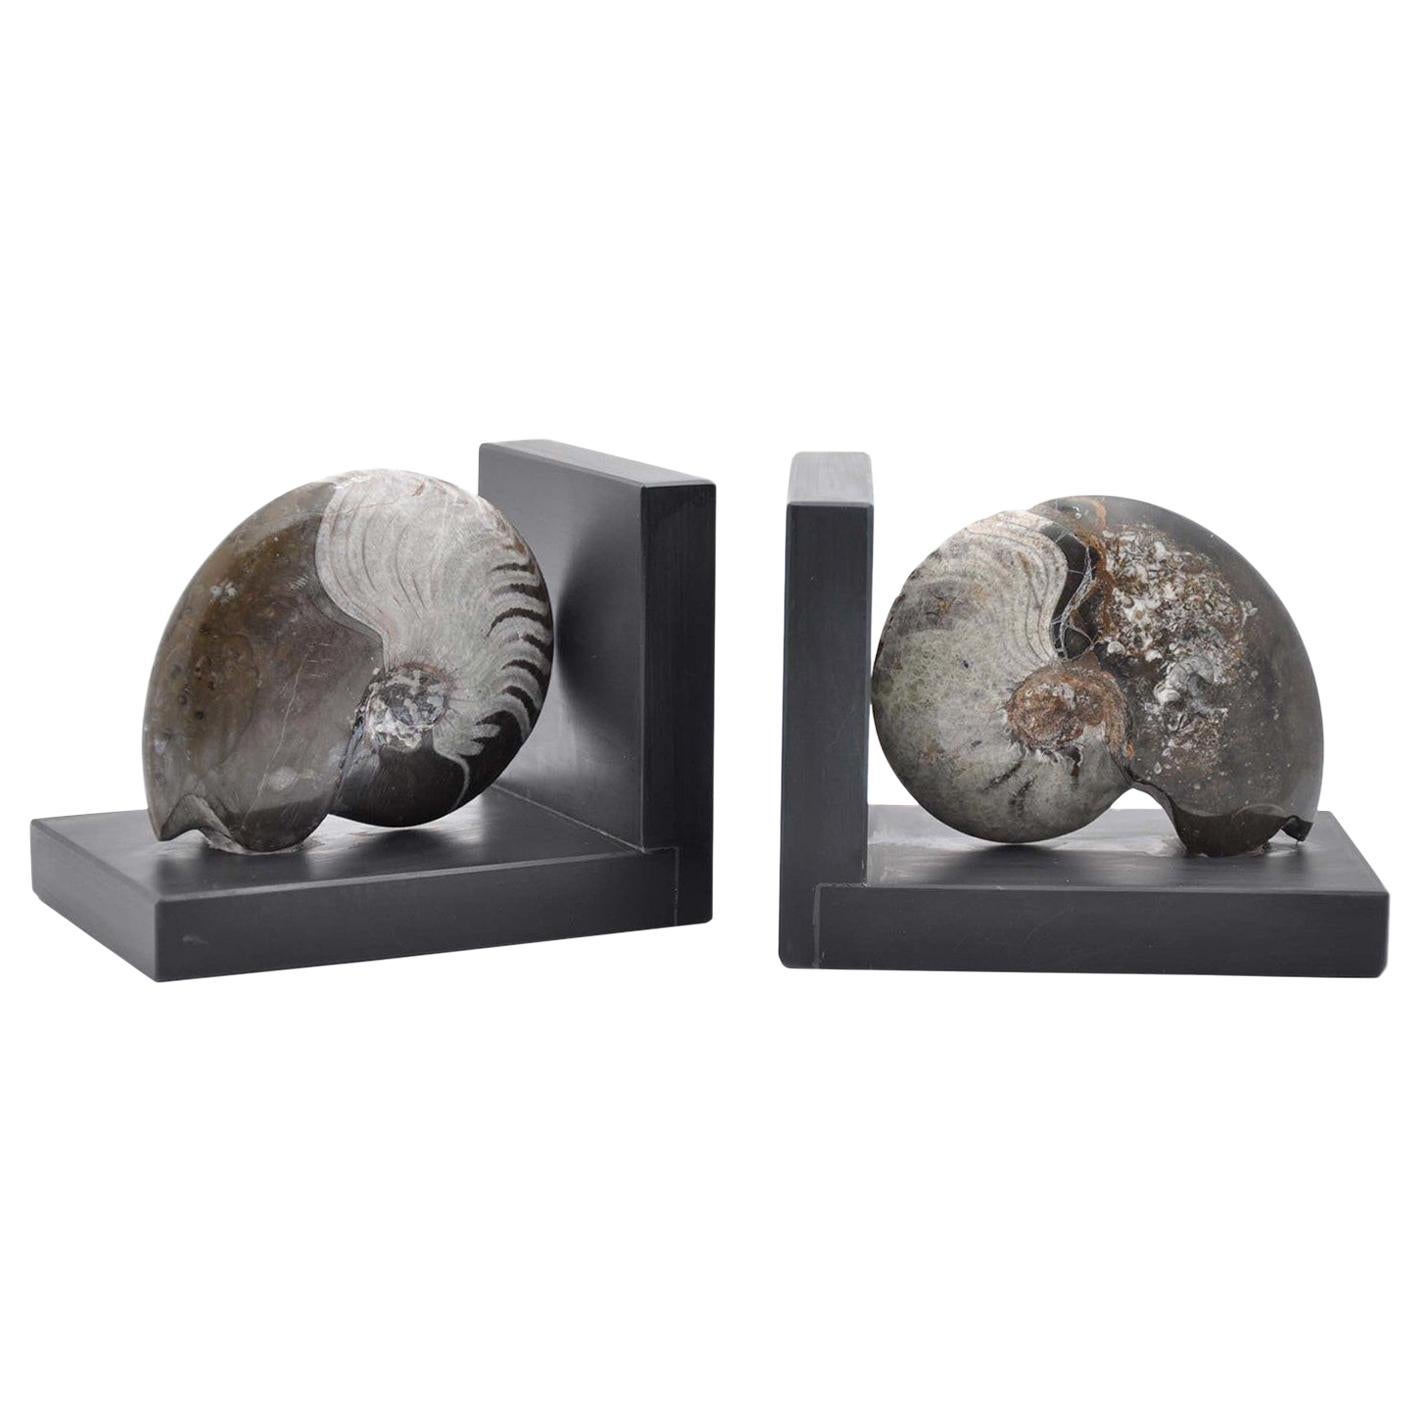 Fossiline Bookends Sculpture #4 by Nino Basso For Sale